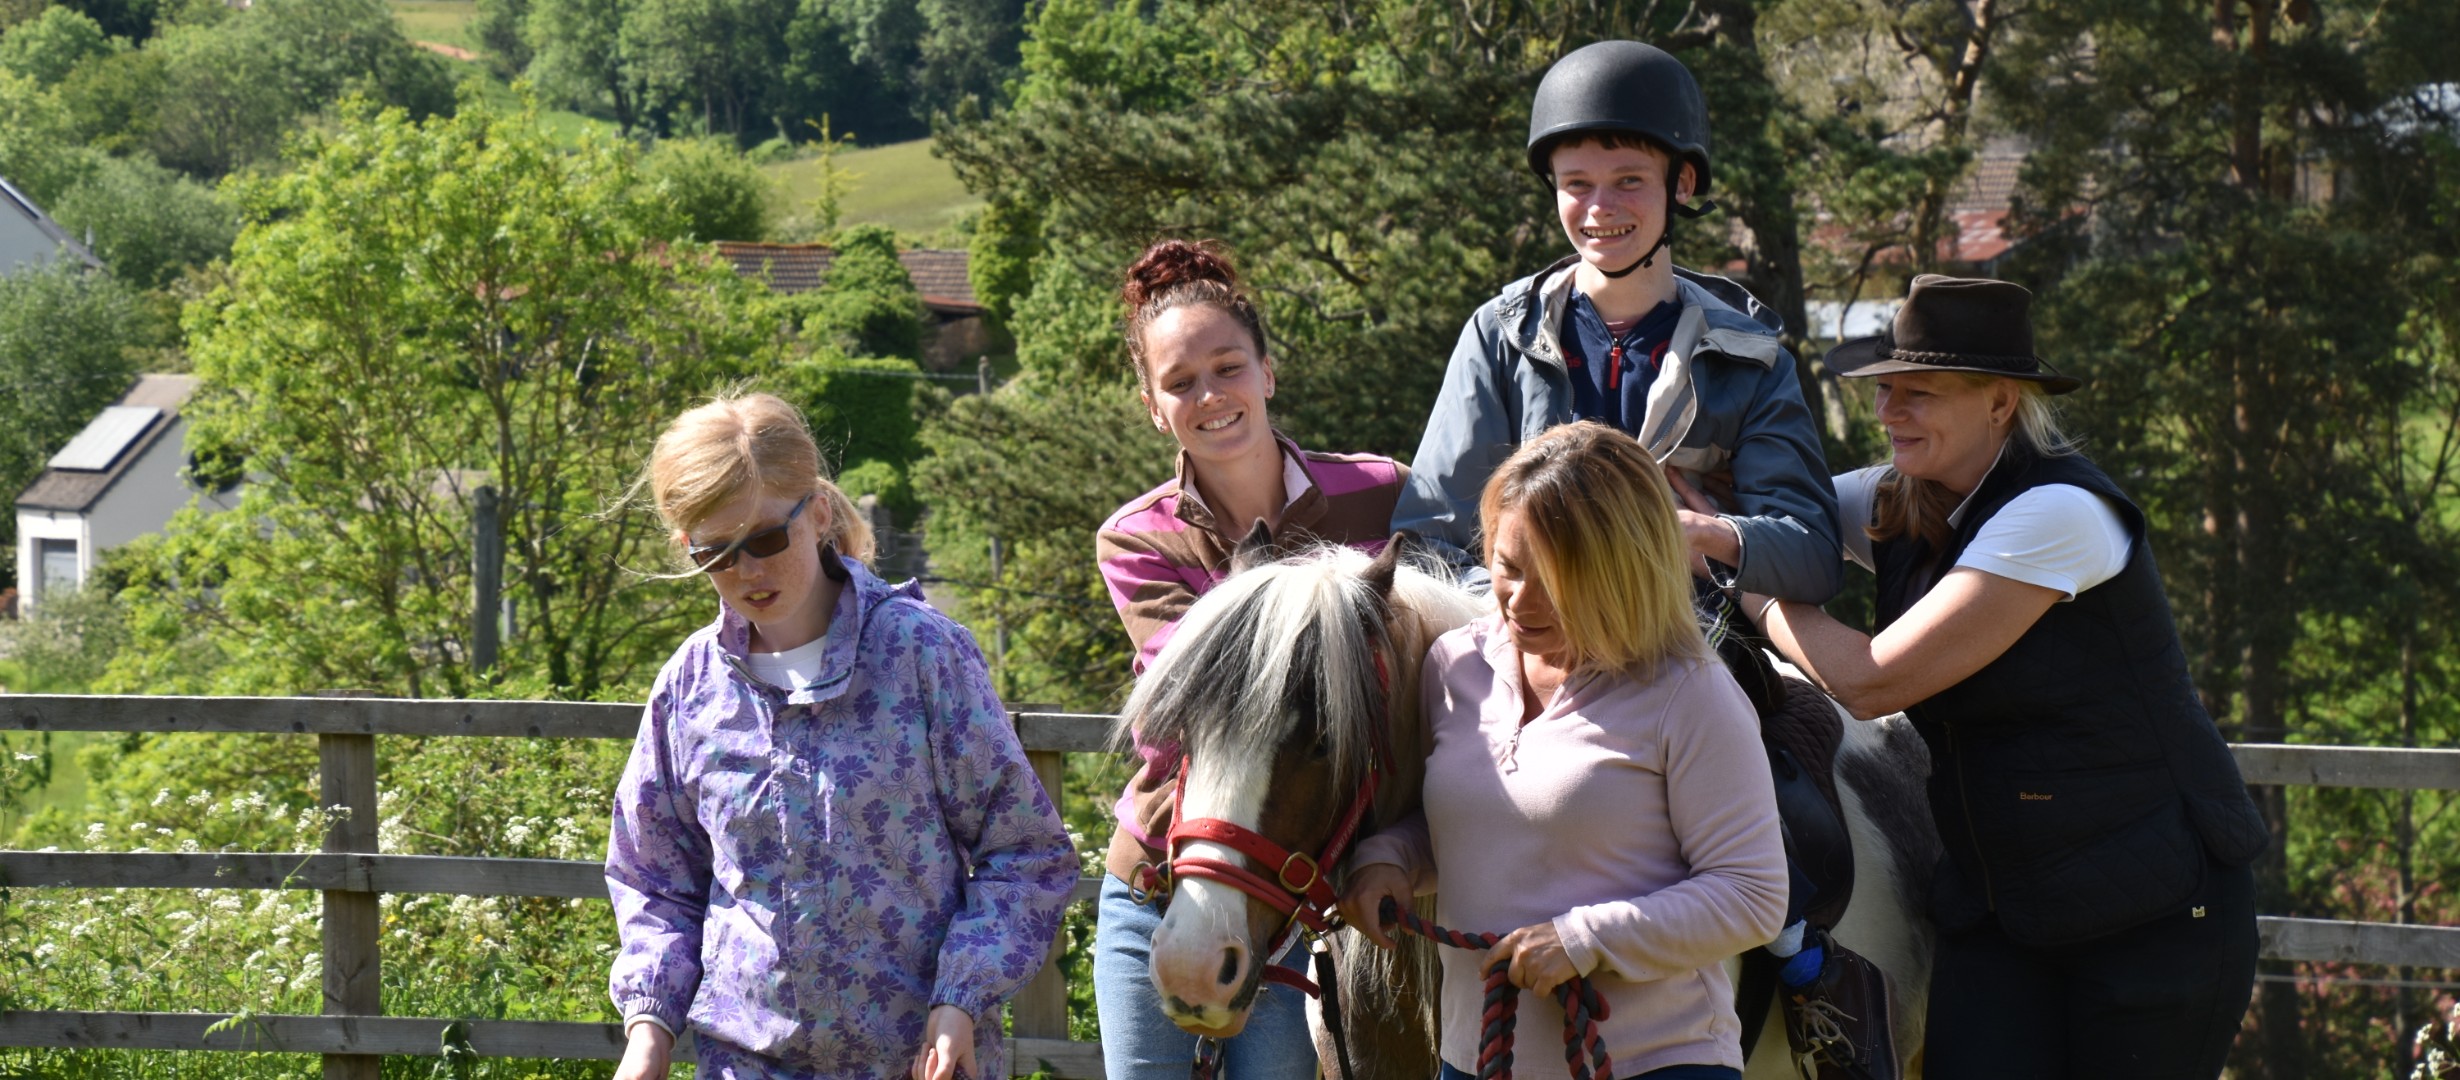 One person sat on a horse with two adults supporting them alongside the horse and two people leading the horse on reins. The background is a tree lined fence. 